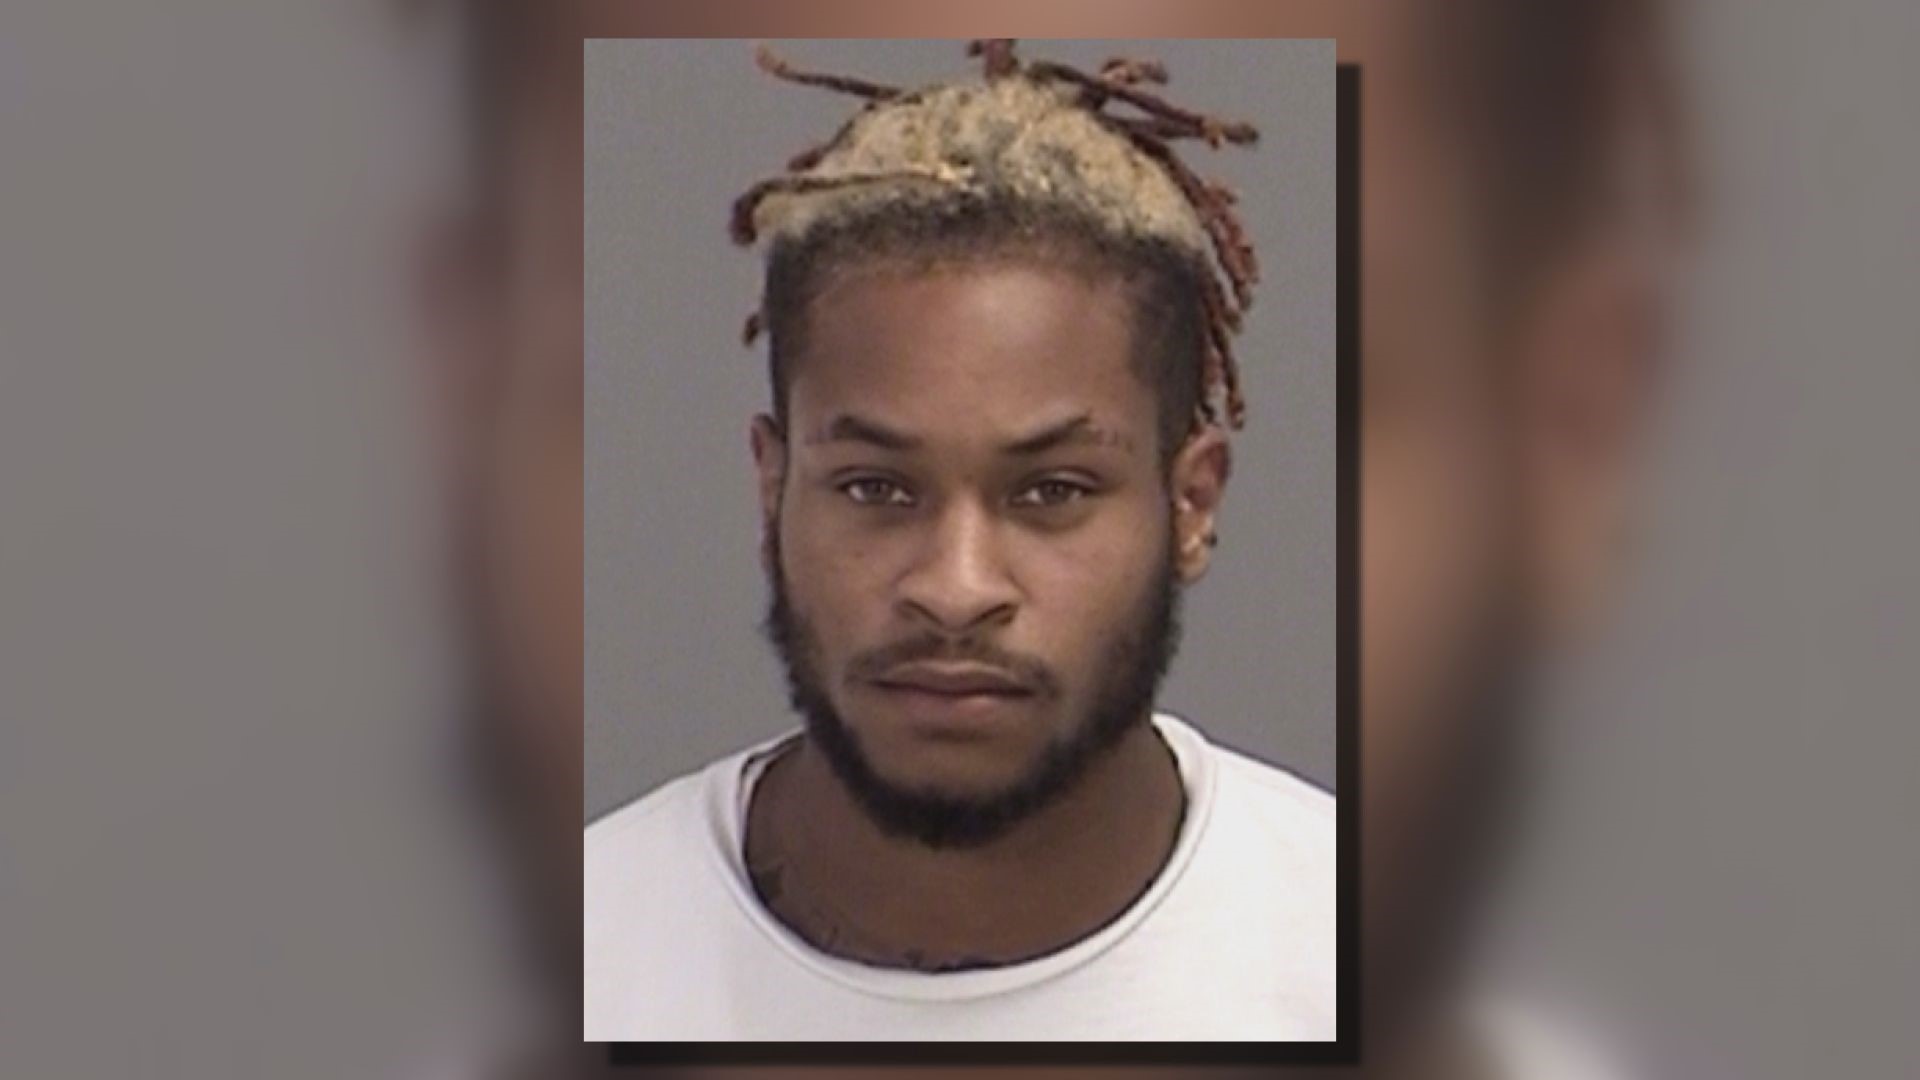 Texas A&M football player arrested for assault, reportedly over tacos